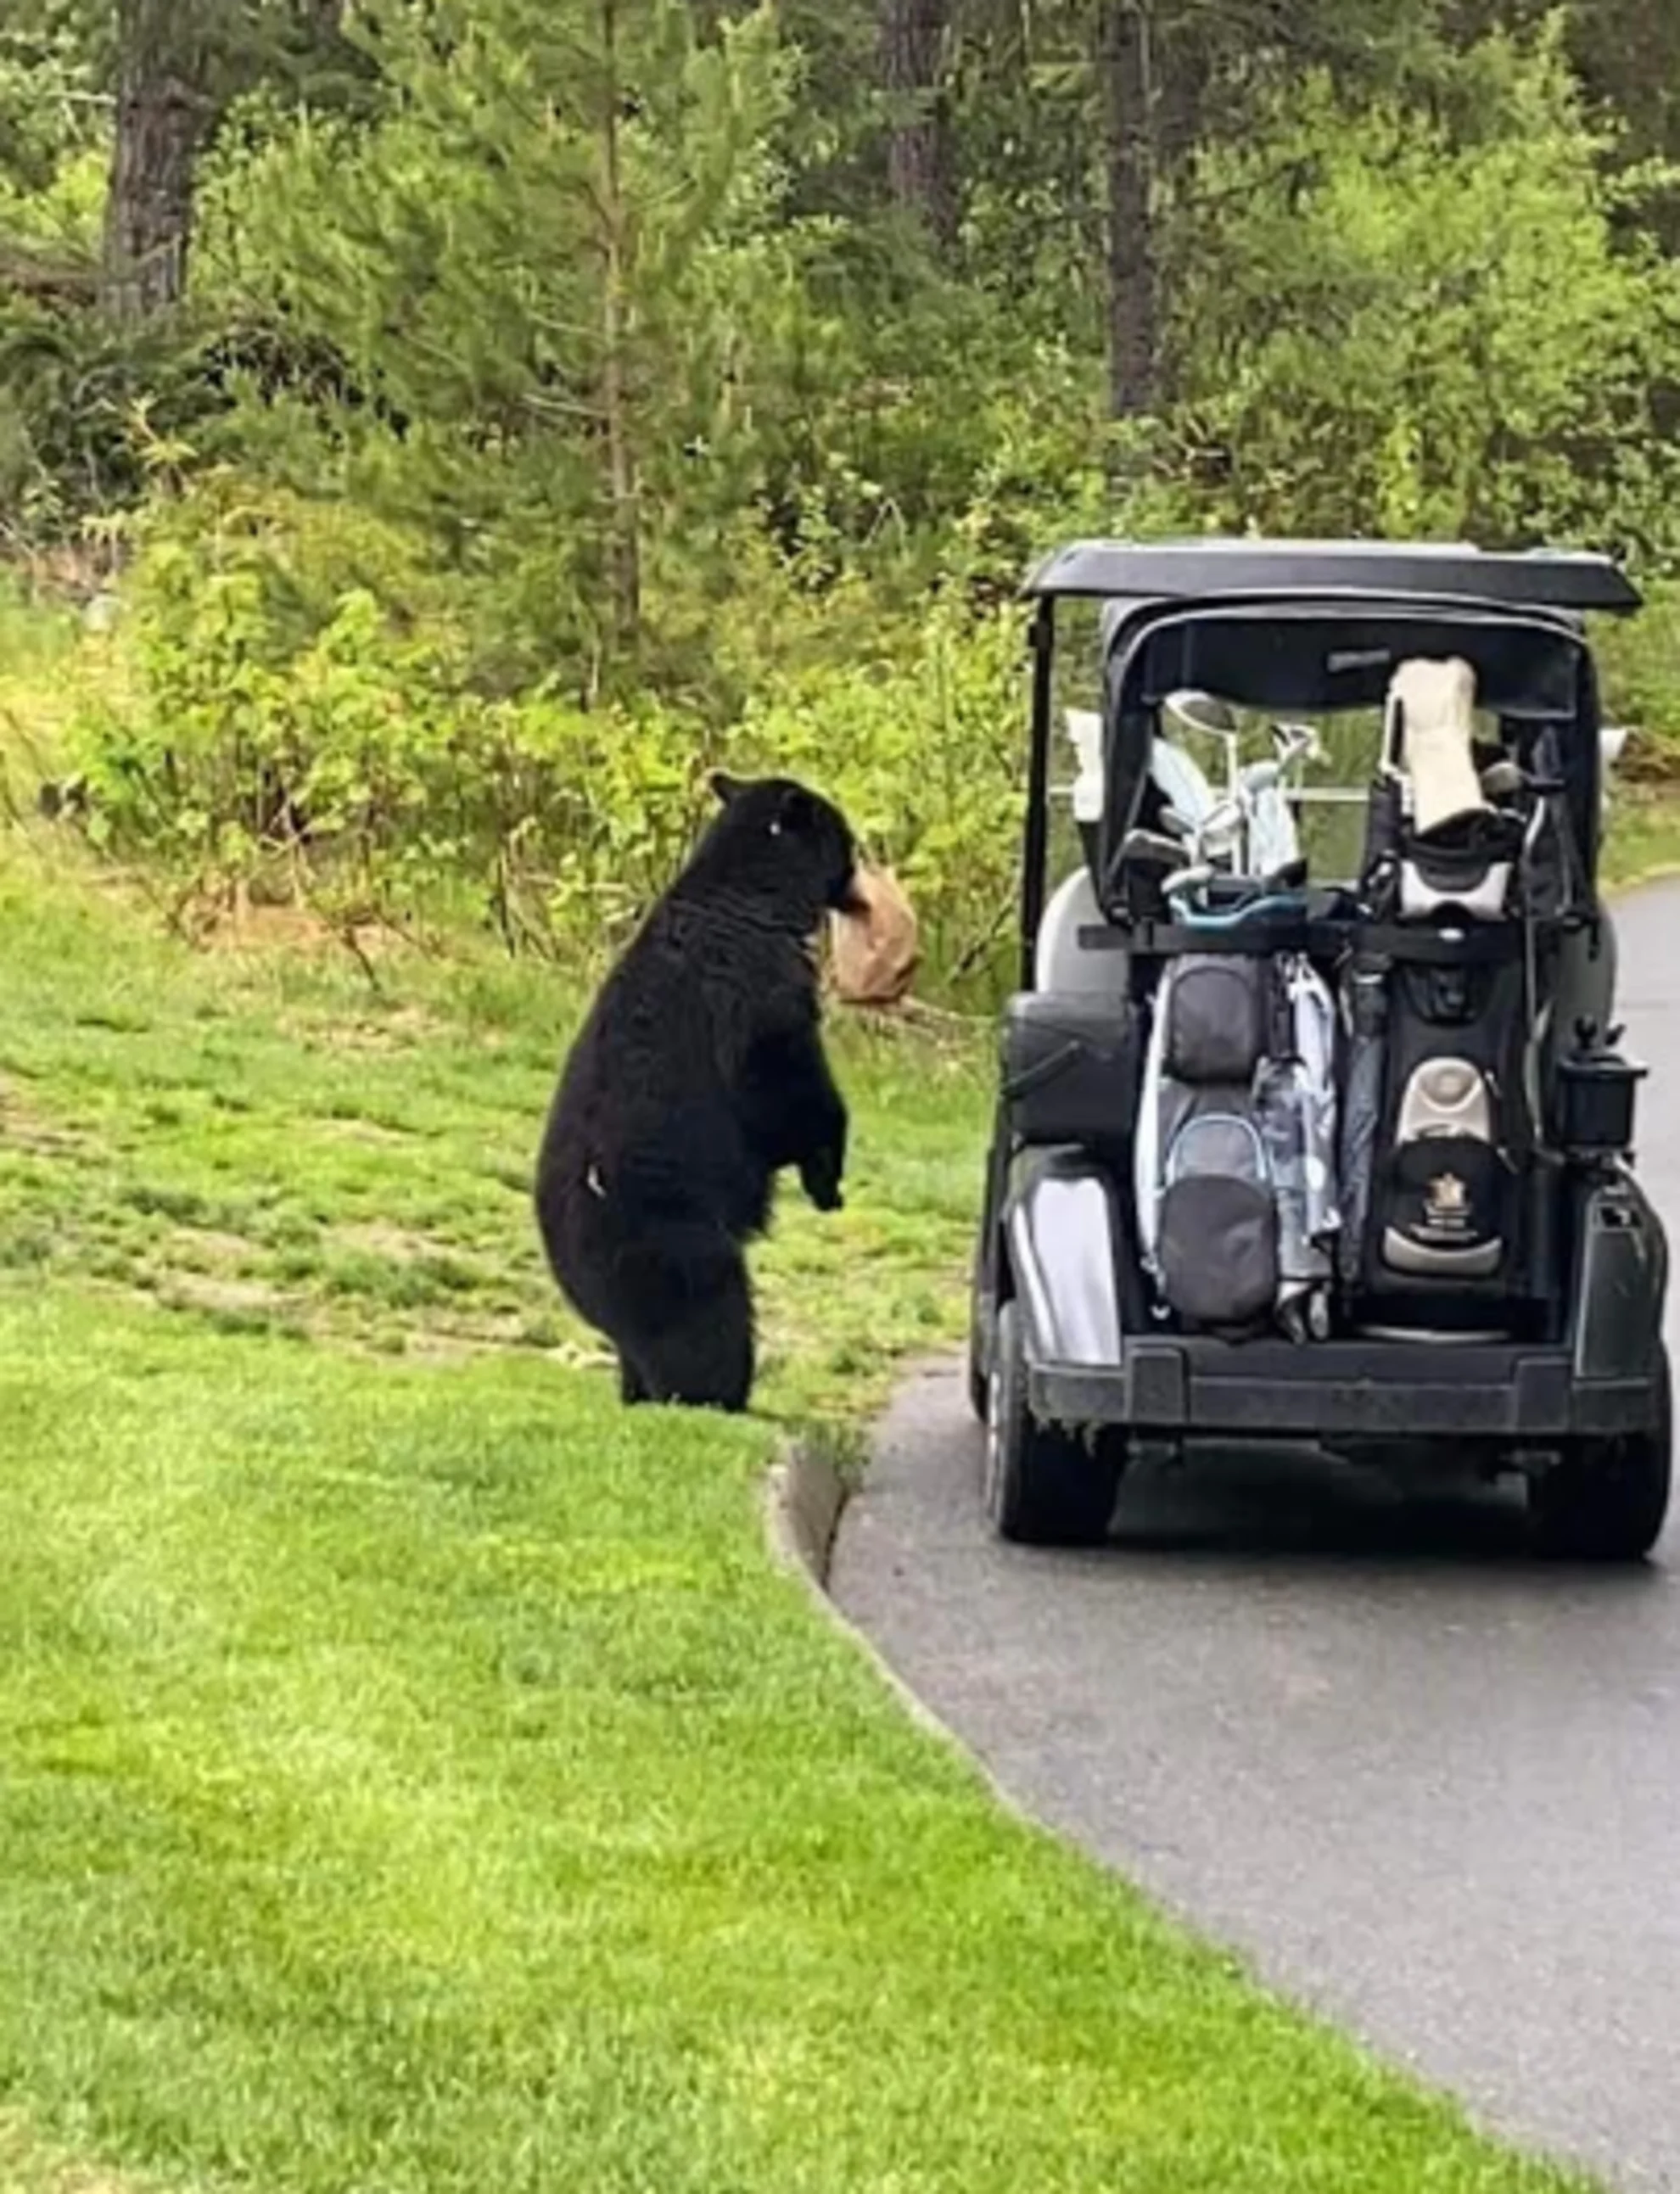 A "lunch-bandit" bear was caught stealing snacks off a golfer's cart recently! Watch the video, here